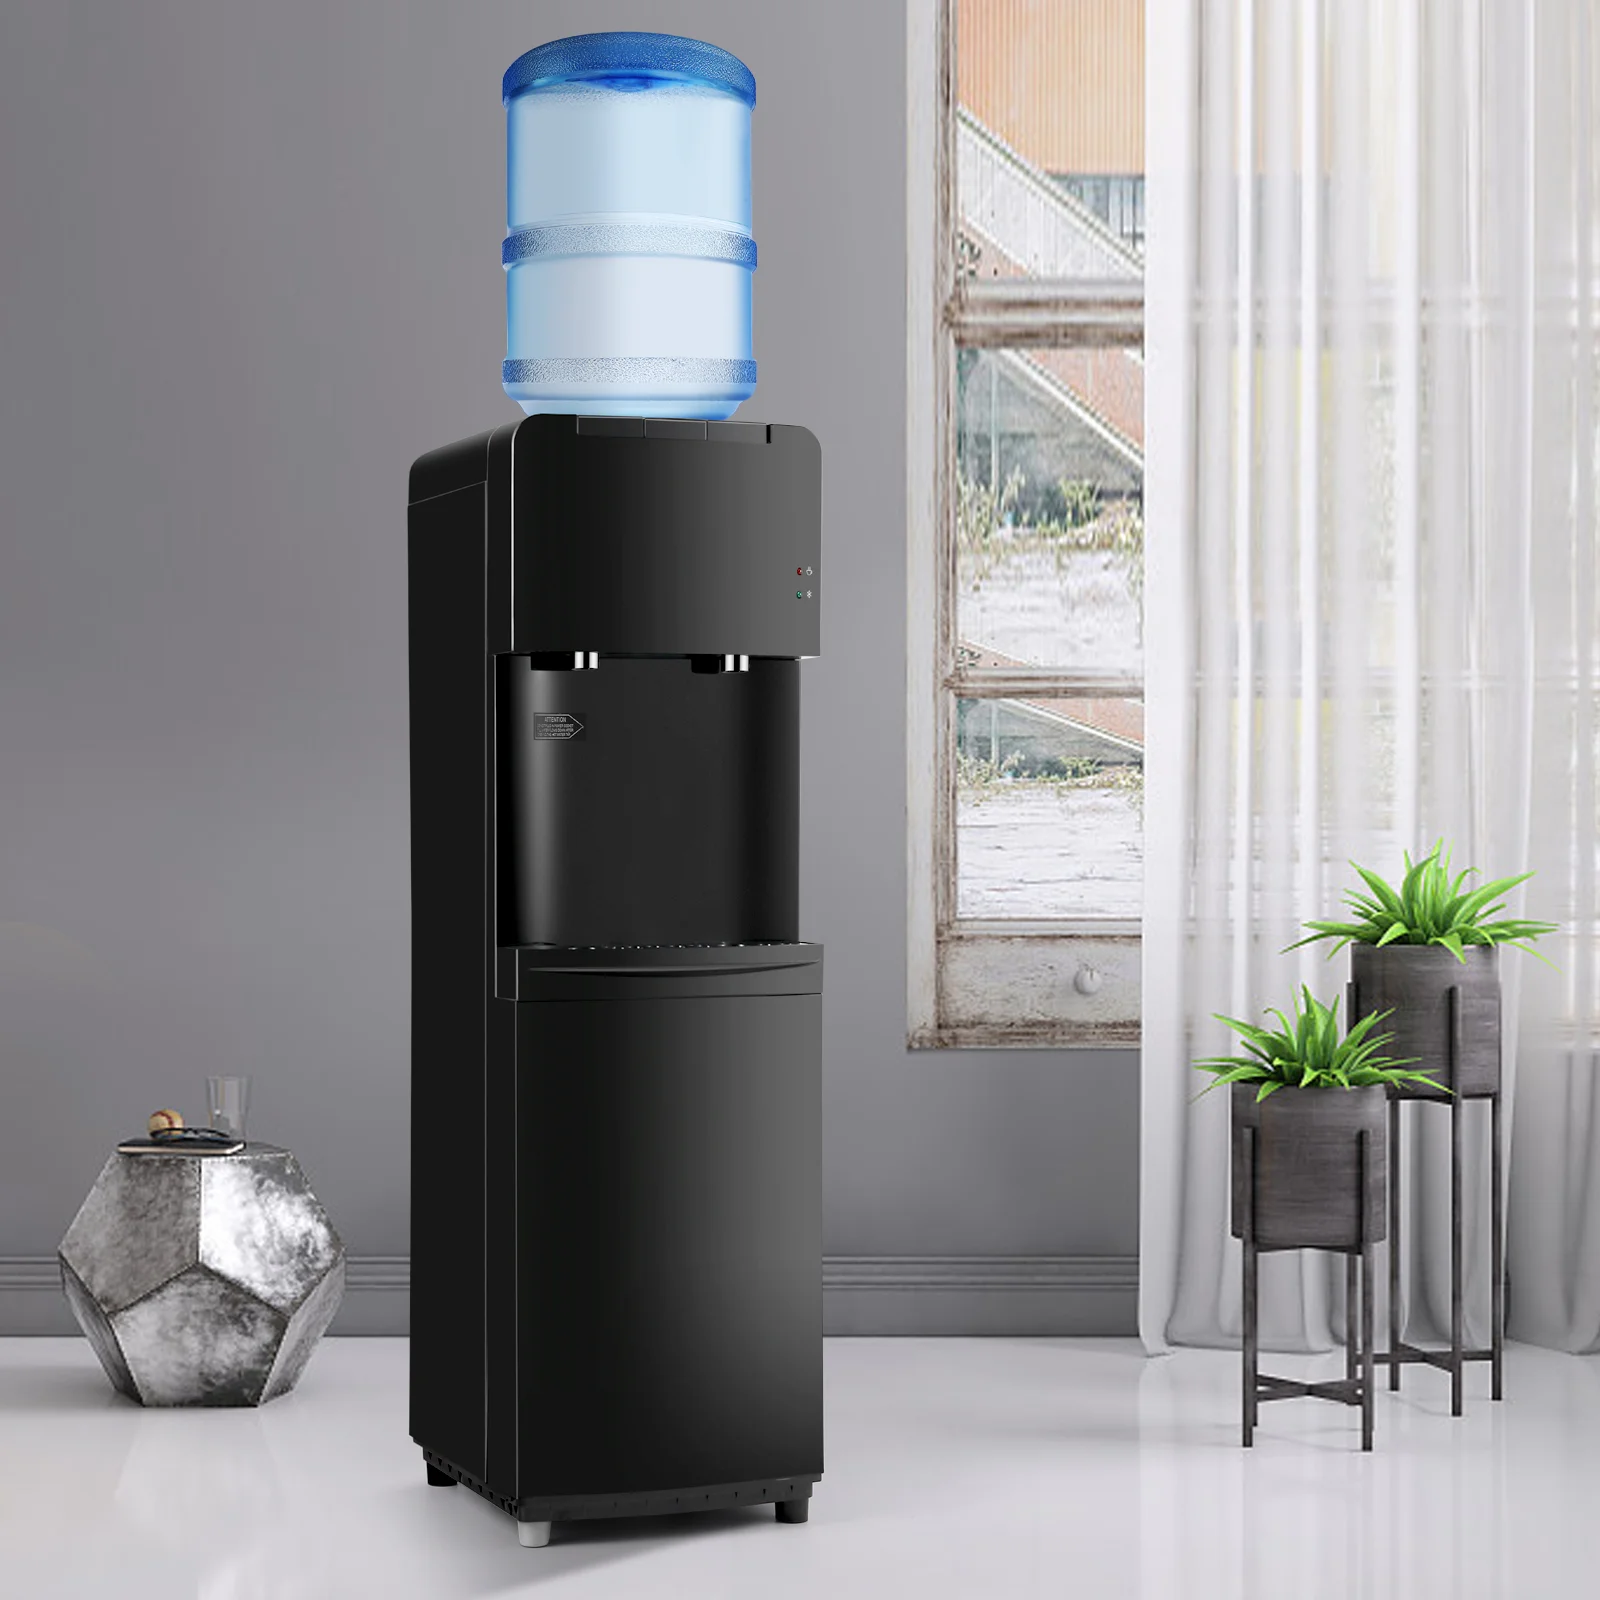 Water Dispenser and ice maker